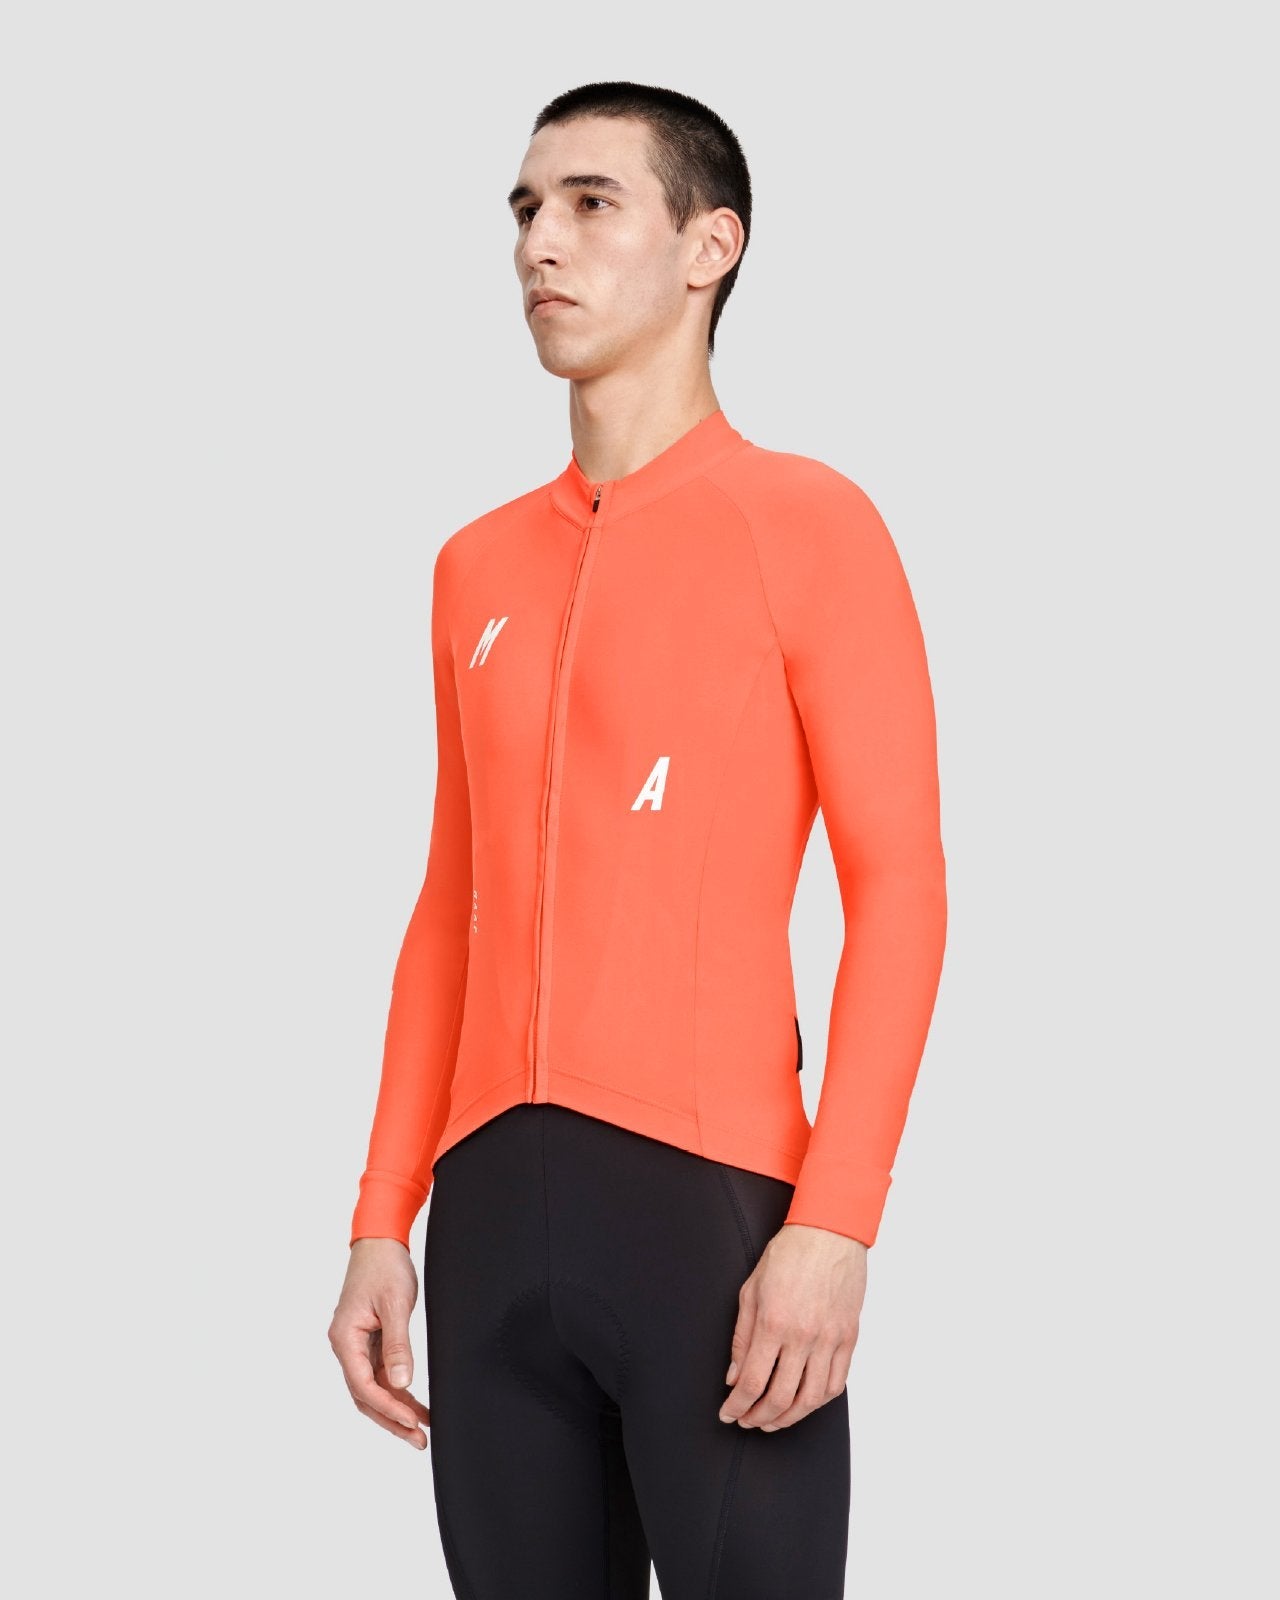 Training Thermal LS Jersey - MAAP Cycling Apparel